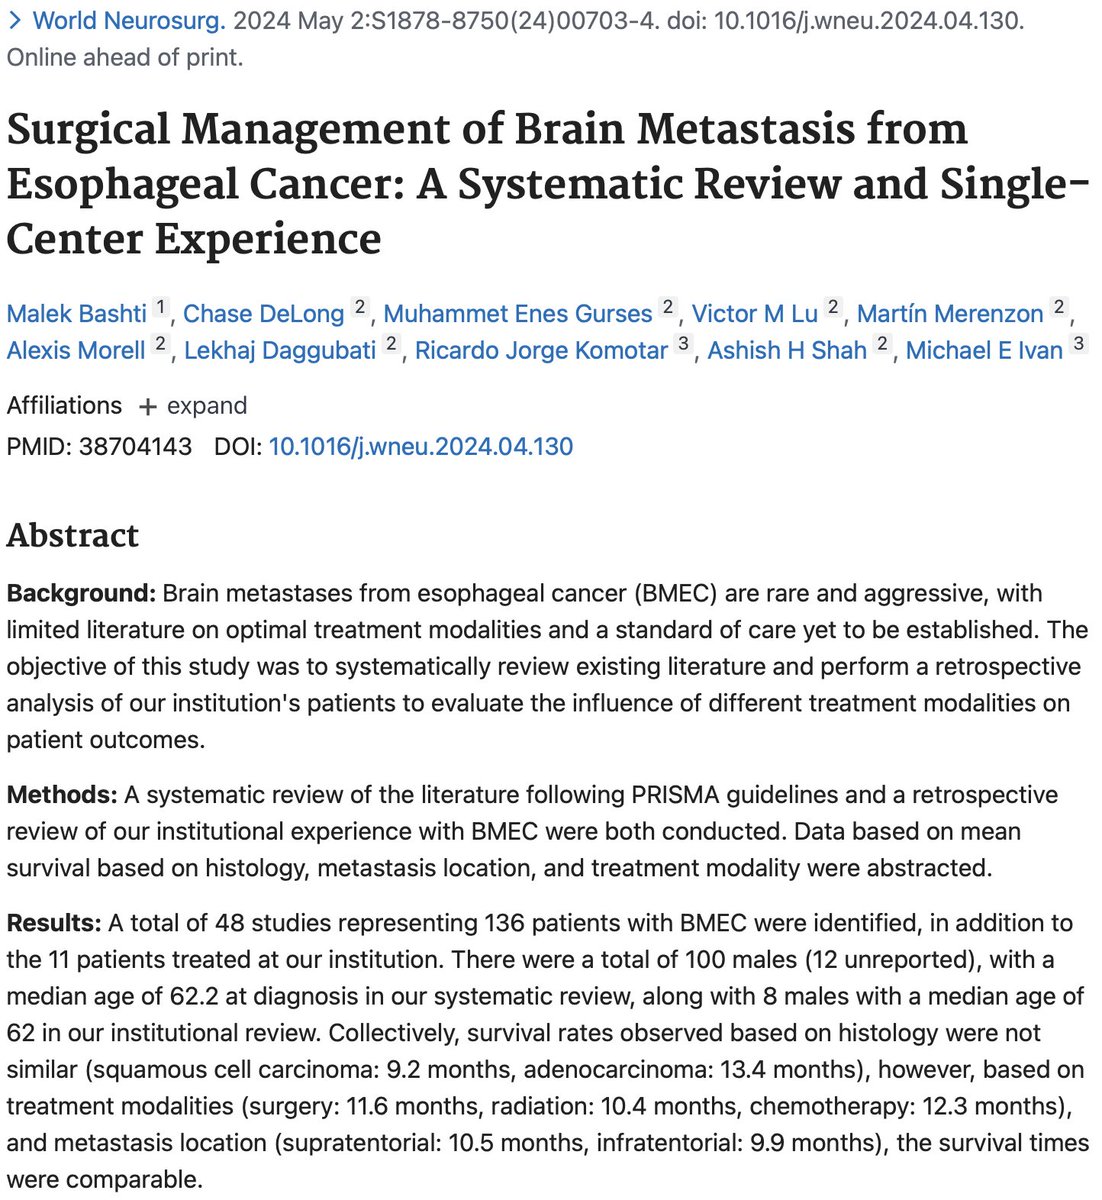 Our latest research on Brain Metastases from Esophageal Cancer is published in World Neurosurgery! #Neurosurgery #neuro #Oncology